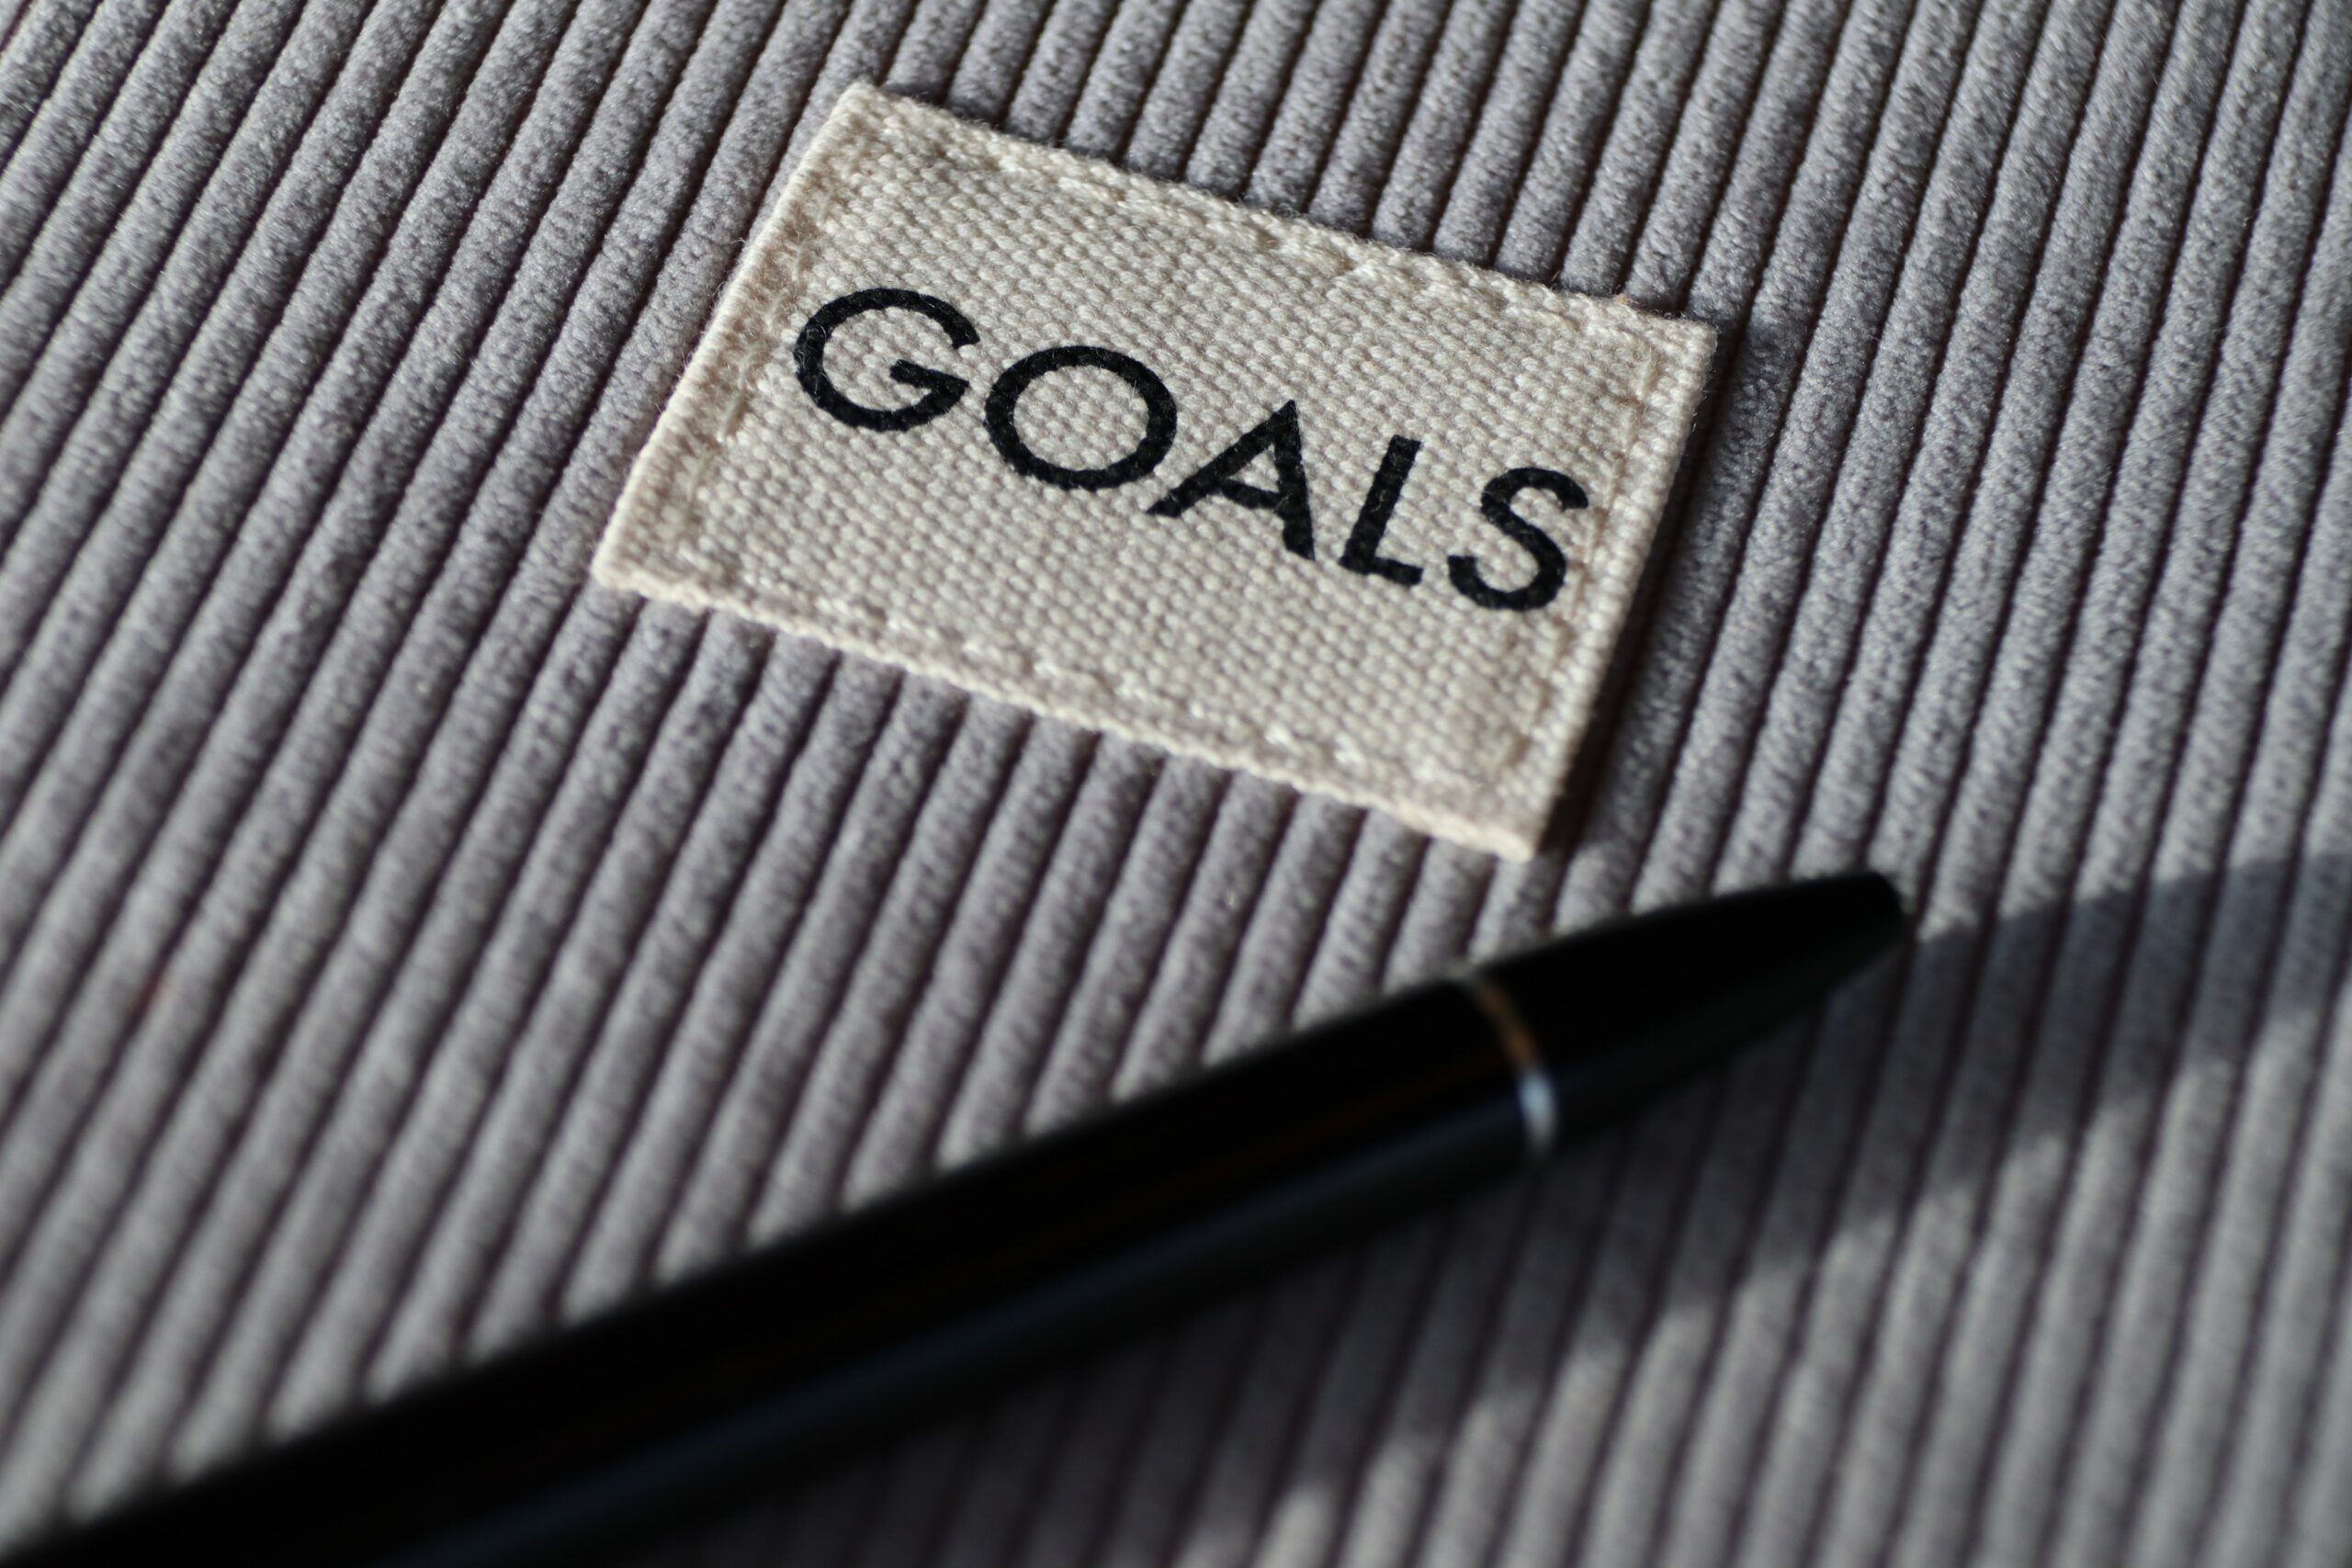 Five reasons why is setting up goals important